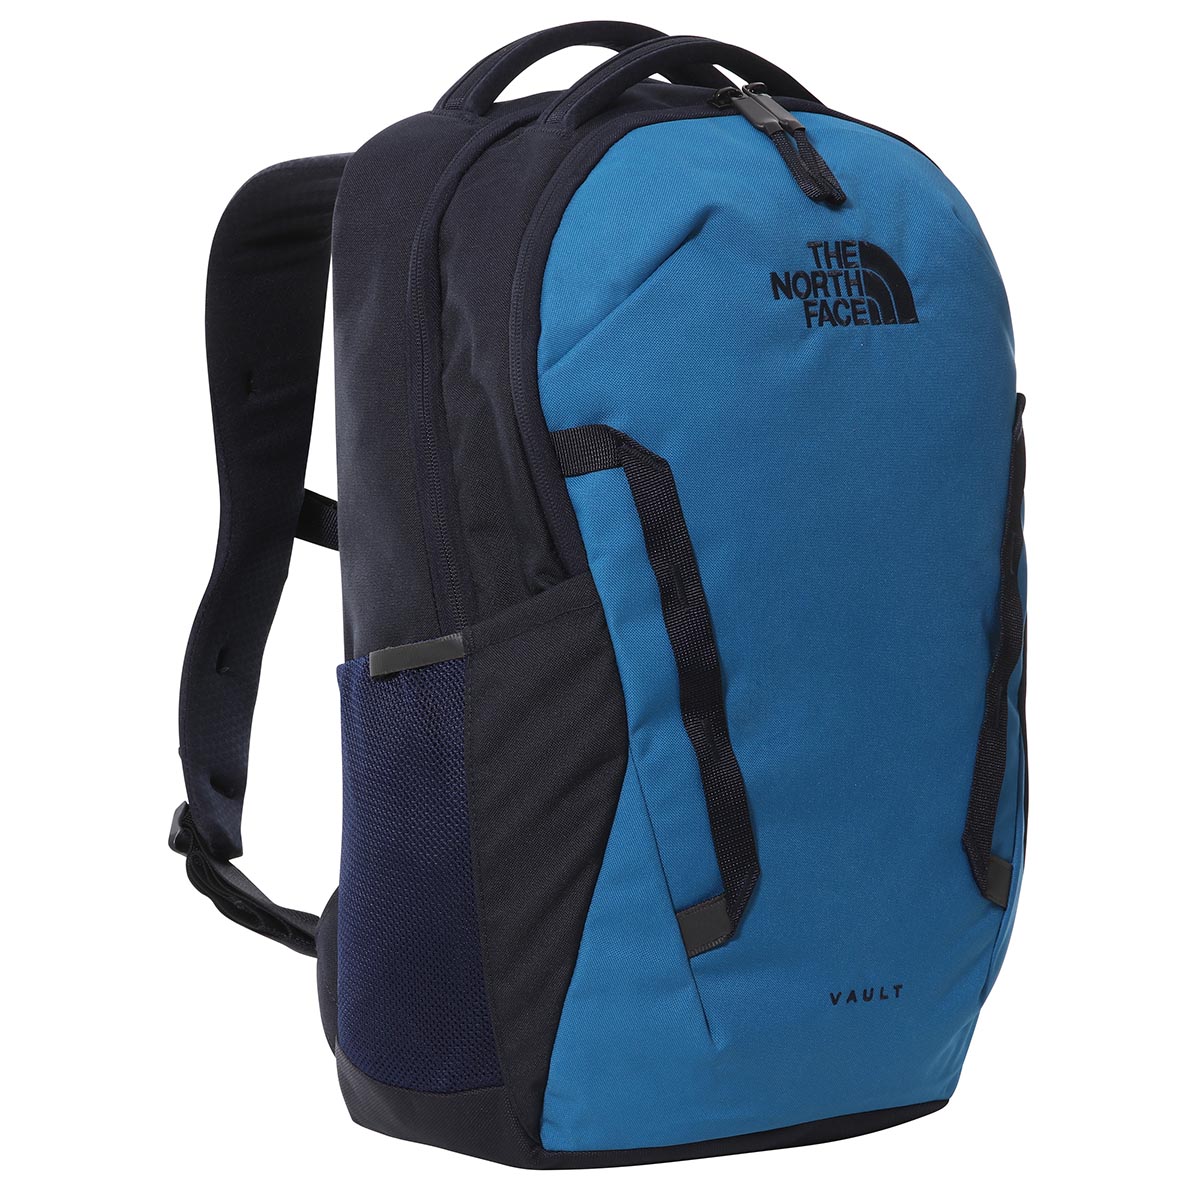 The North Face VAULT NF0A3VY249C1 Çanta